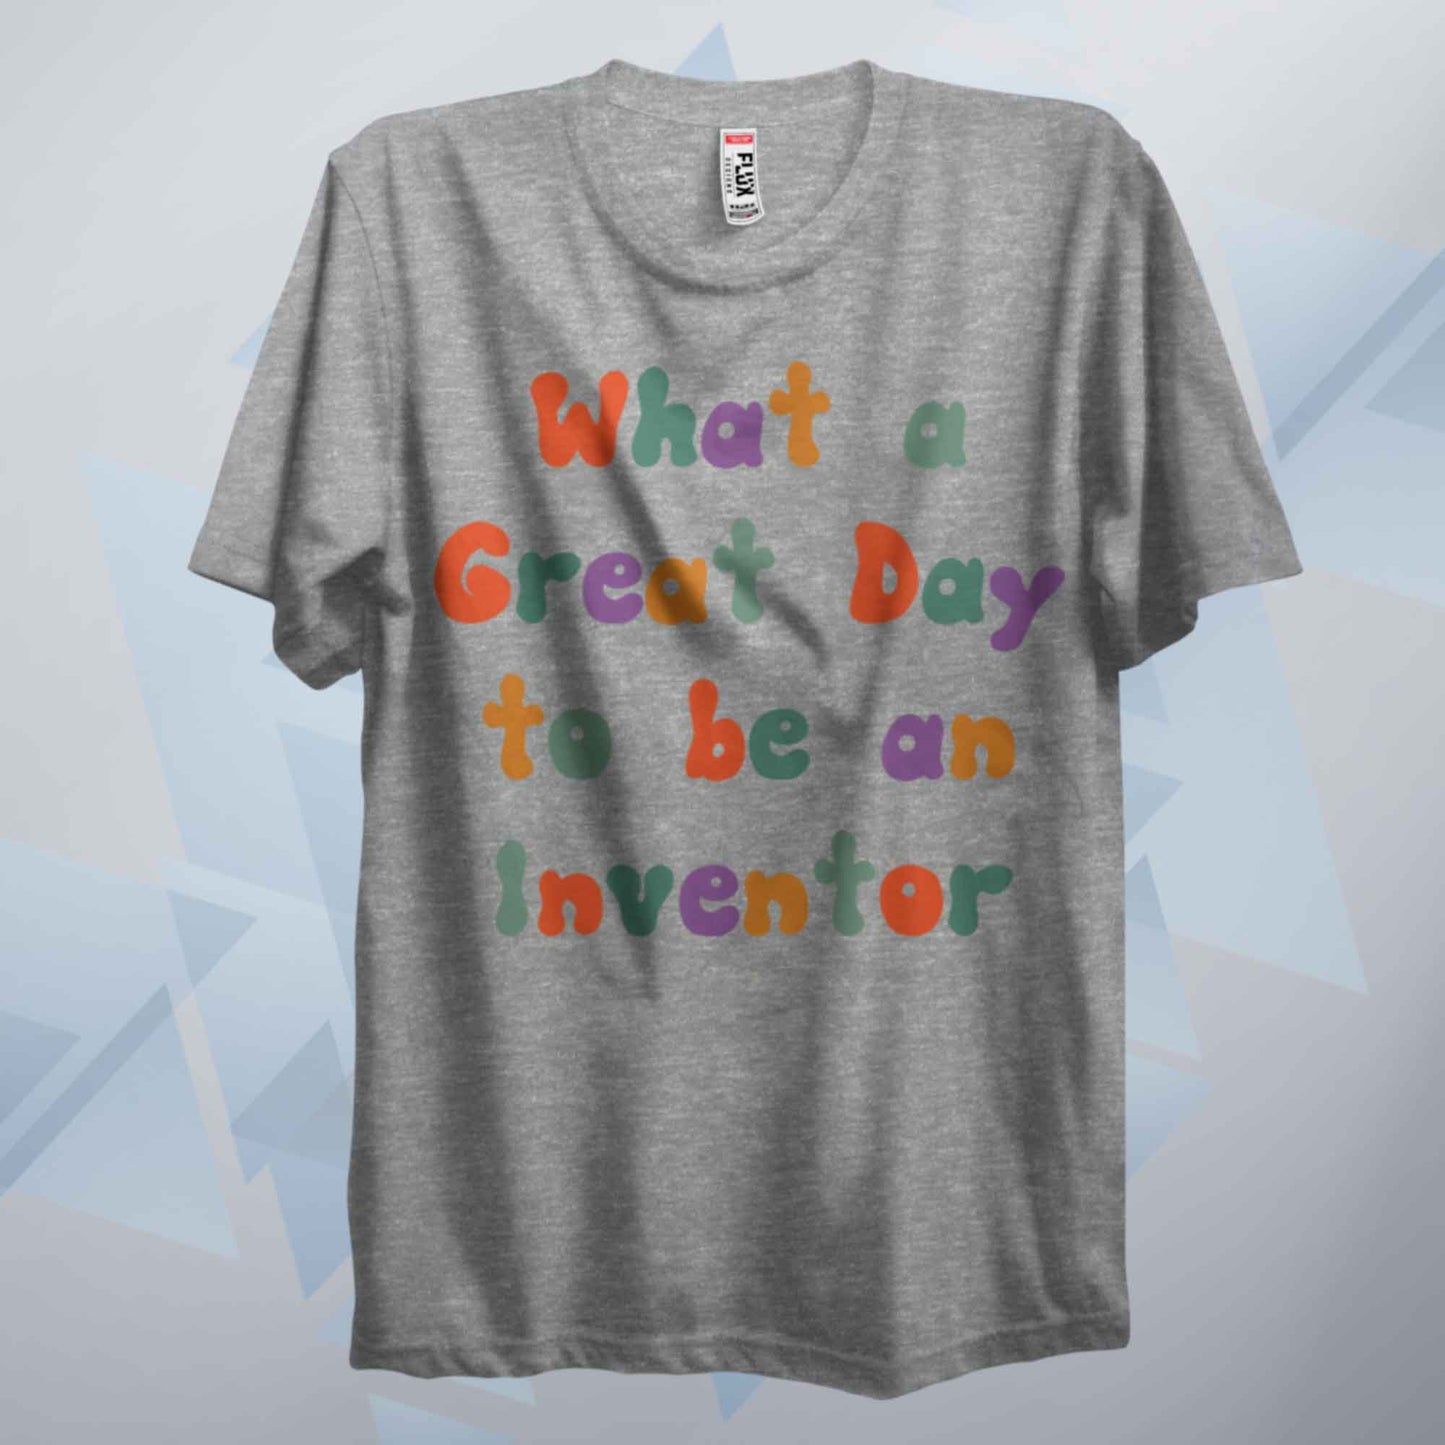 A Great Day To Be An Inventor Retro T Shirt